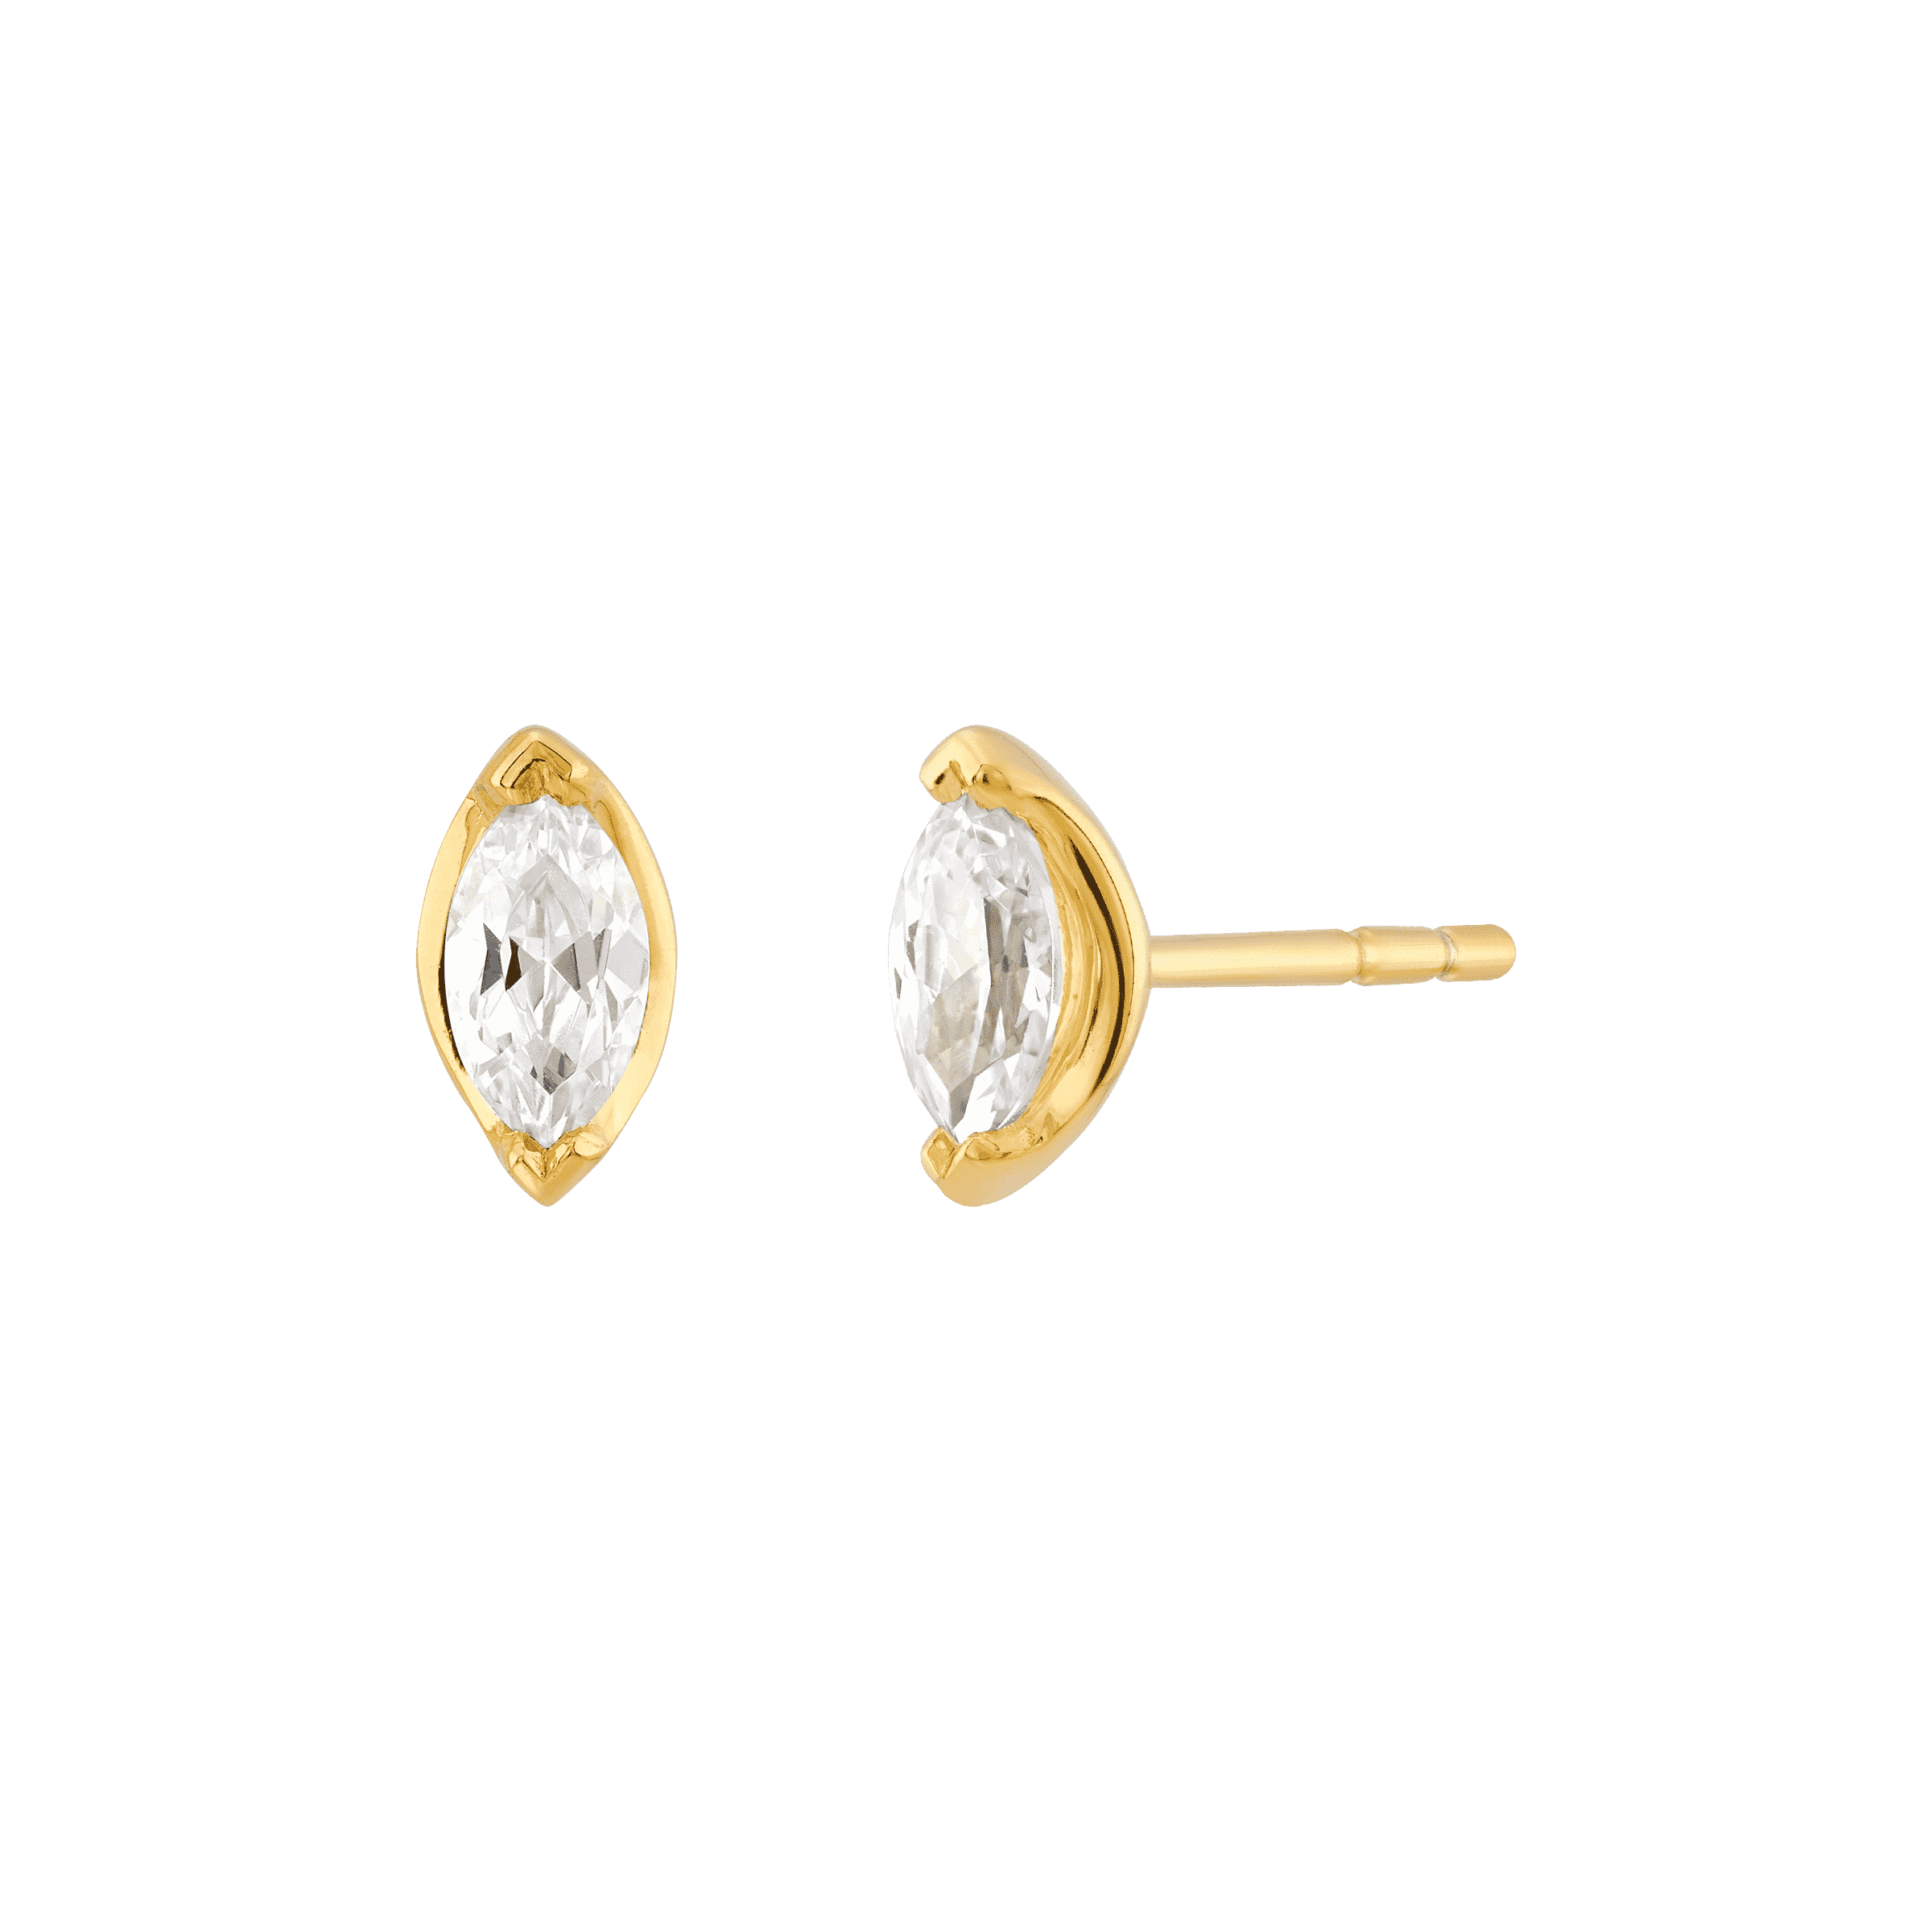 Welry Marquise Stud Earrings with Cubic Zirconia in 14K Gold-Plated Sterling Silver